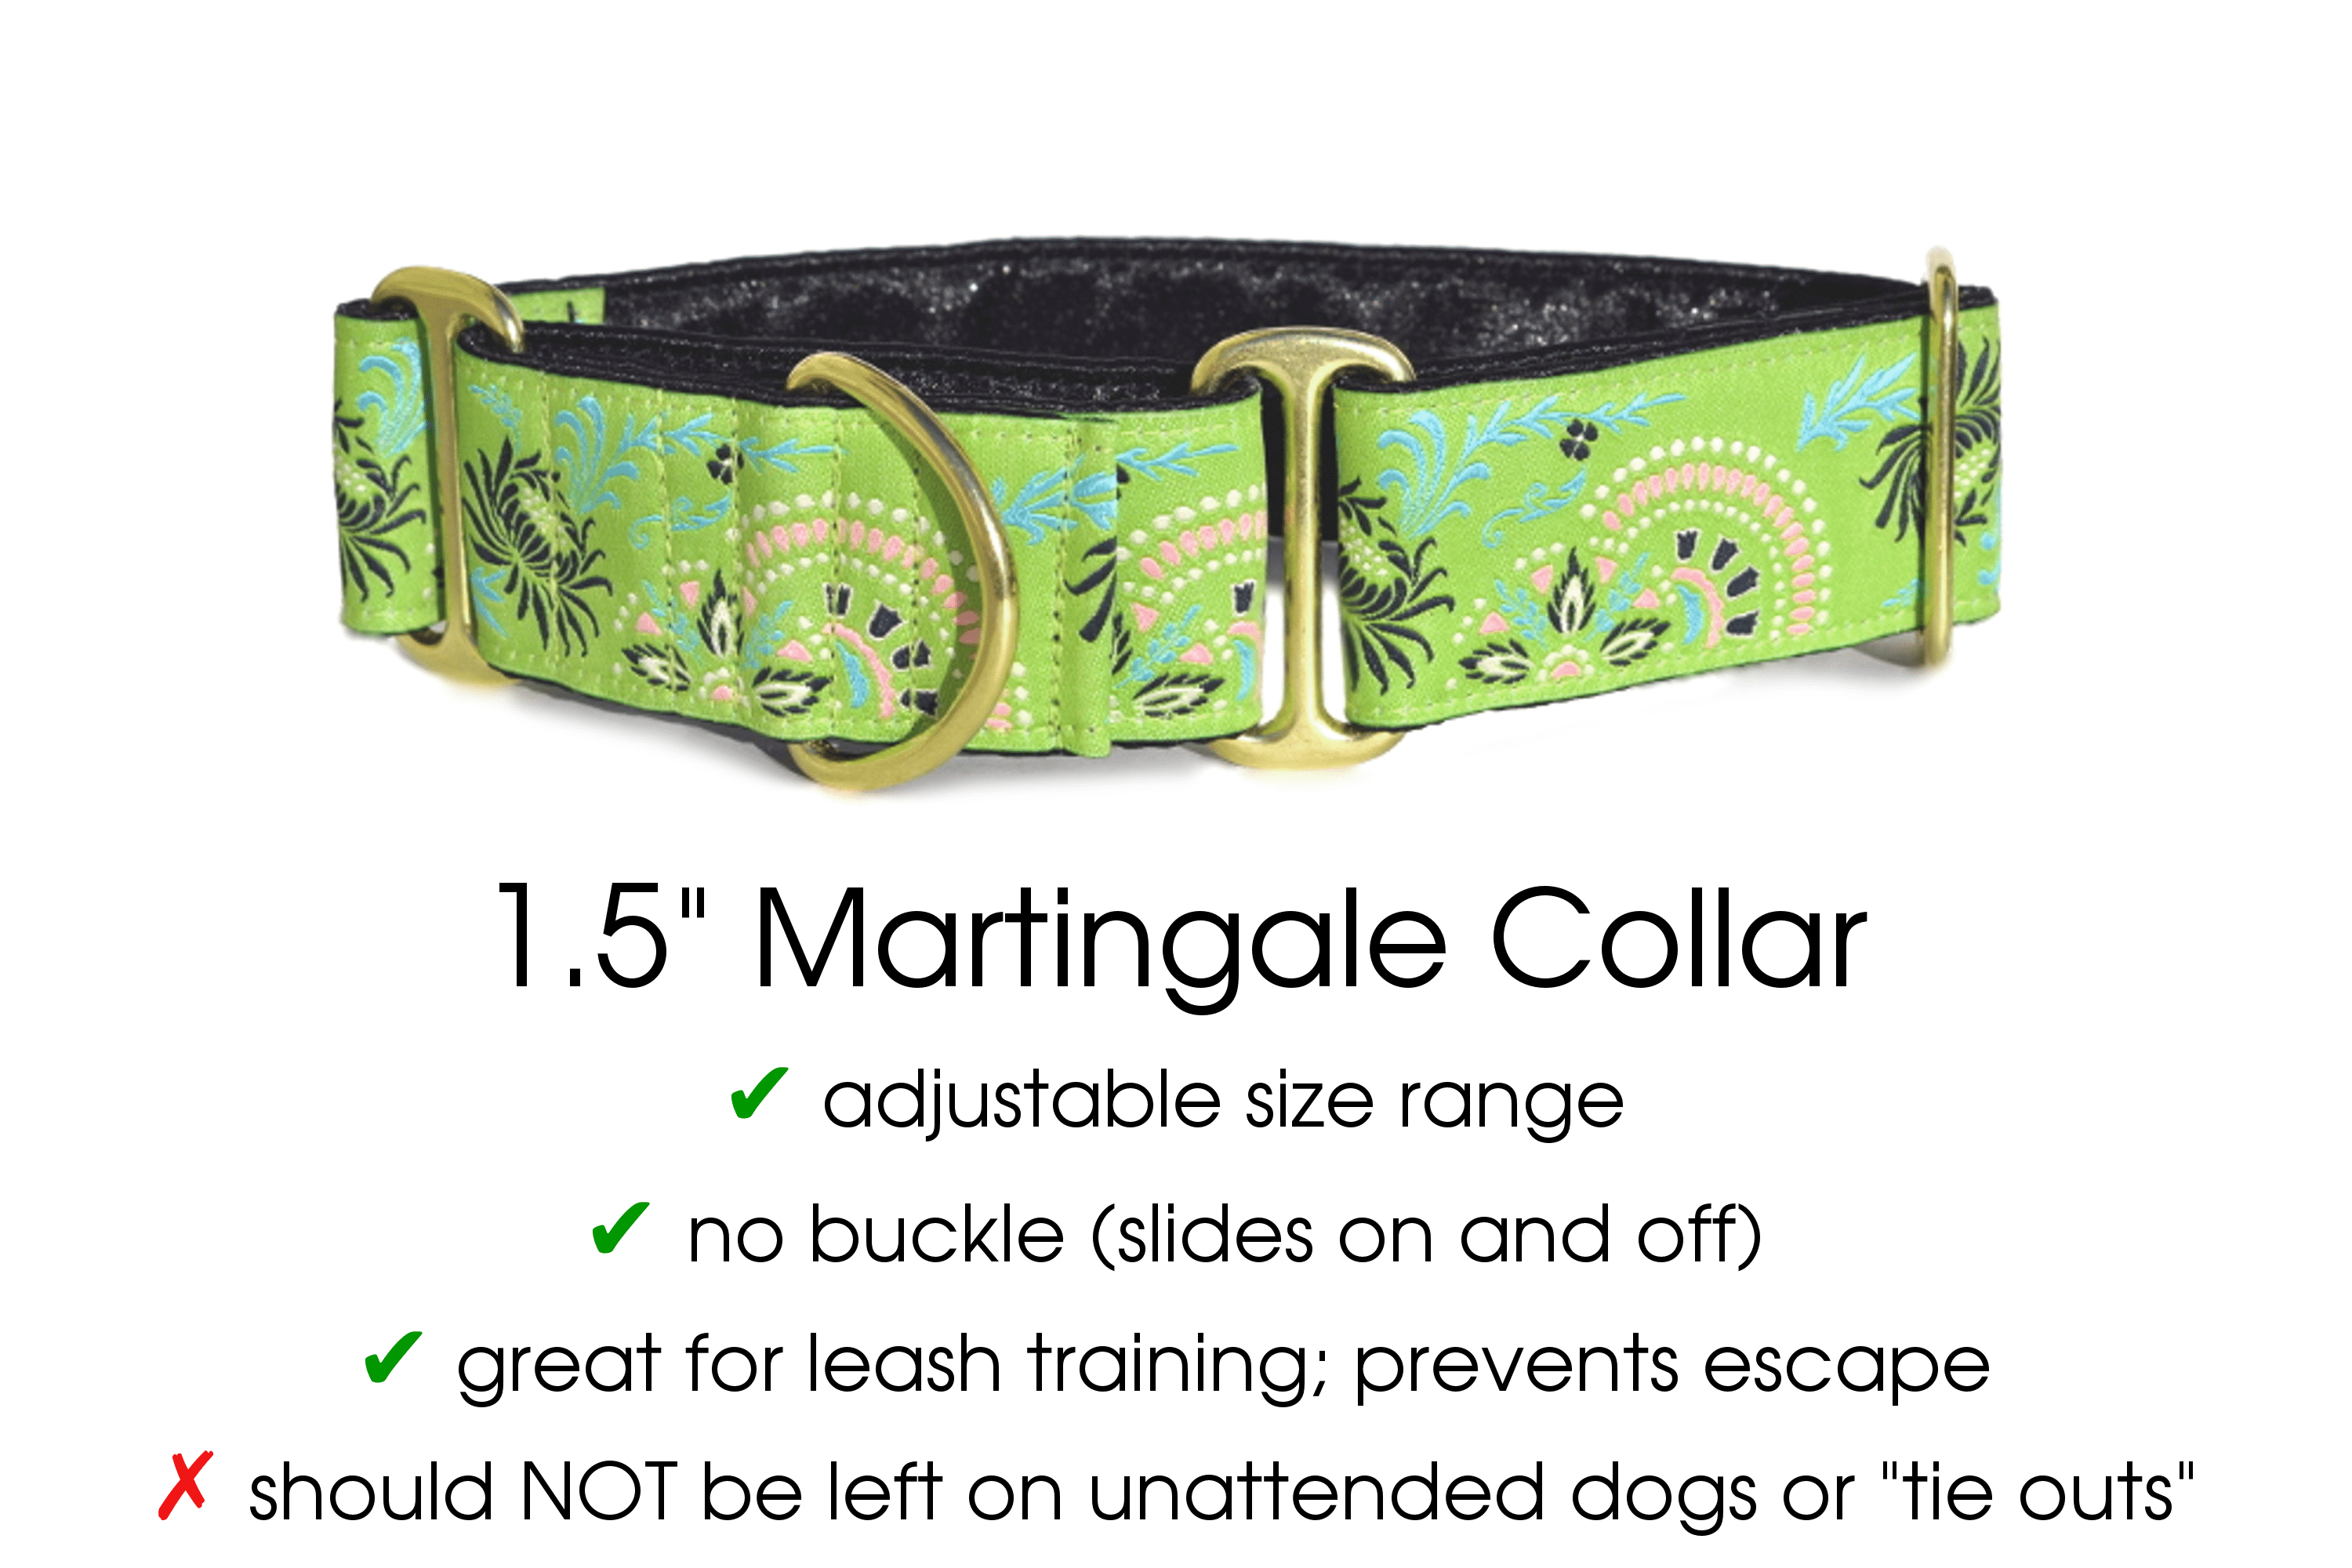 Flower Burst in Lime Green - Martingale Dog Collar or Buckle Dog Collar - 1.5" Width - The Hound Haberdashery